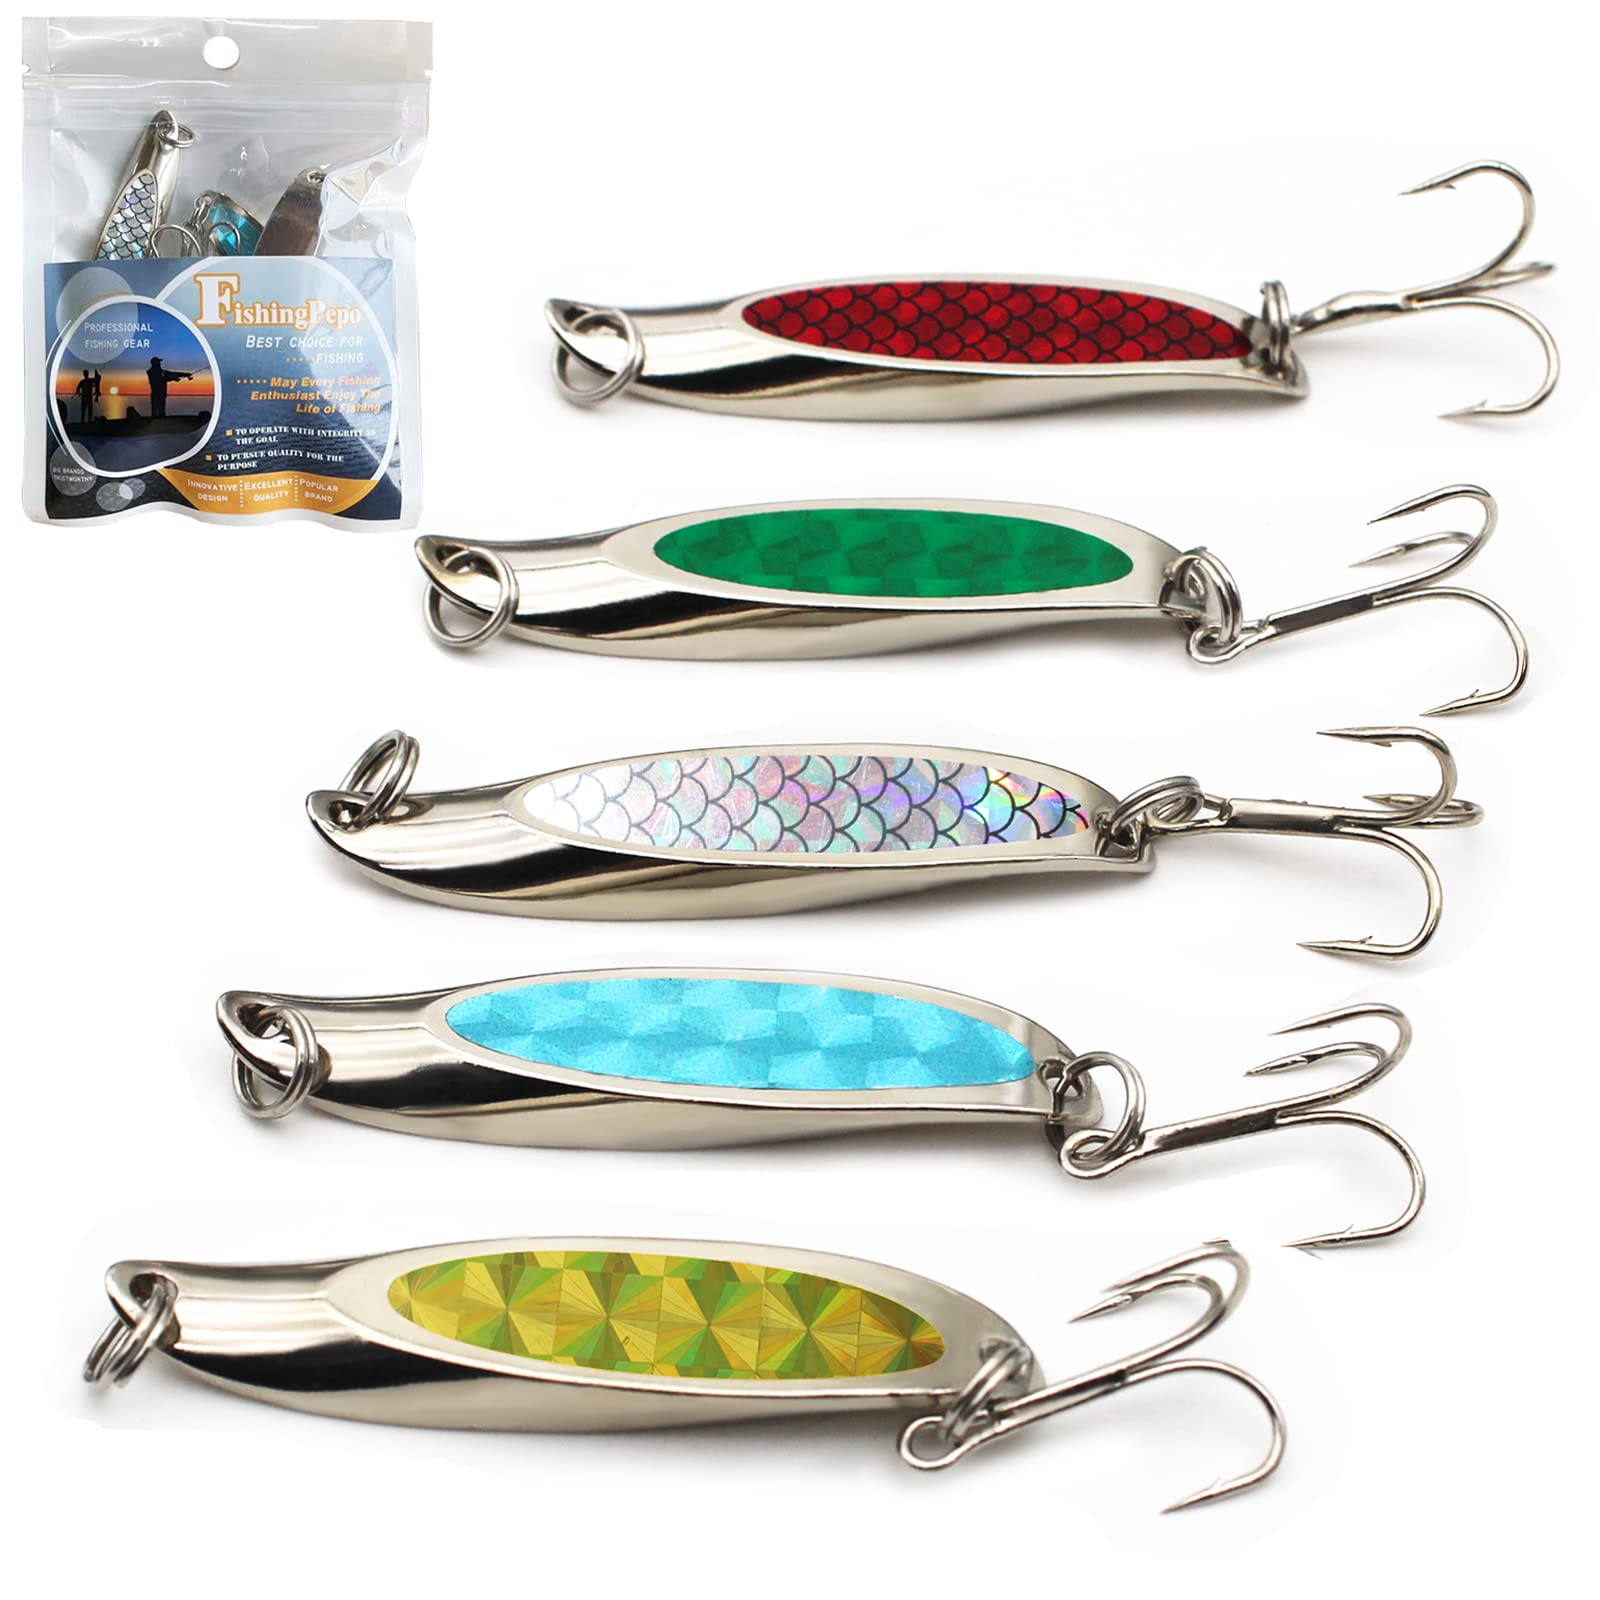 FishingPepo Fishing Spoons Lure, Trout Lures, Bass Lures, Spinning Lures, Fishing Spoons Hard Fishing Lures Treble